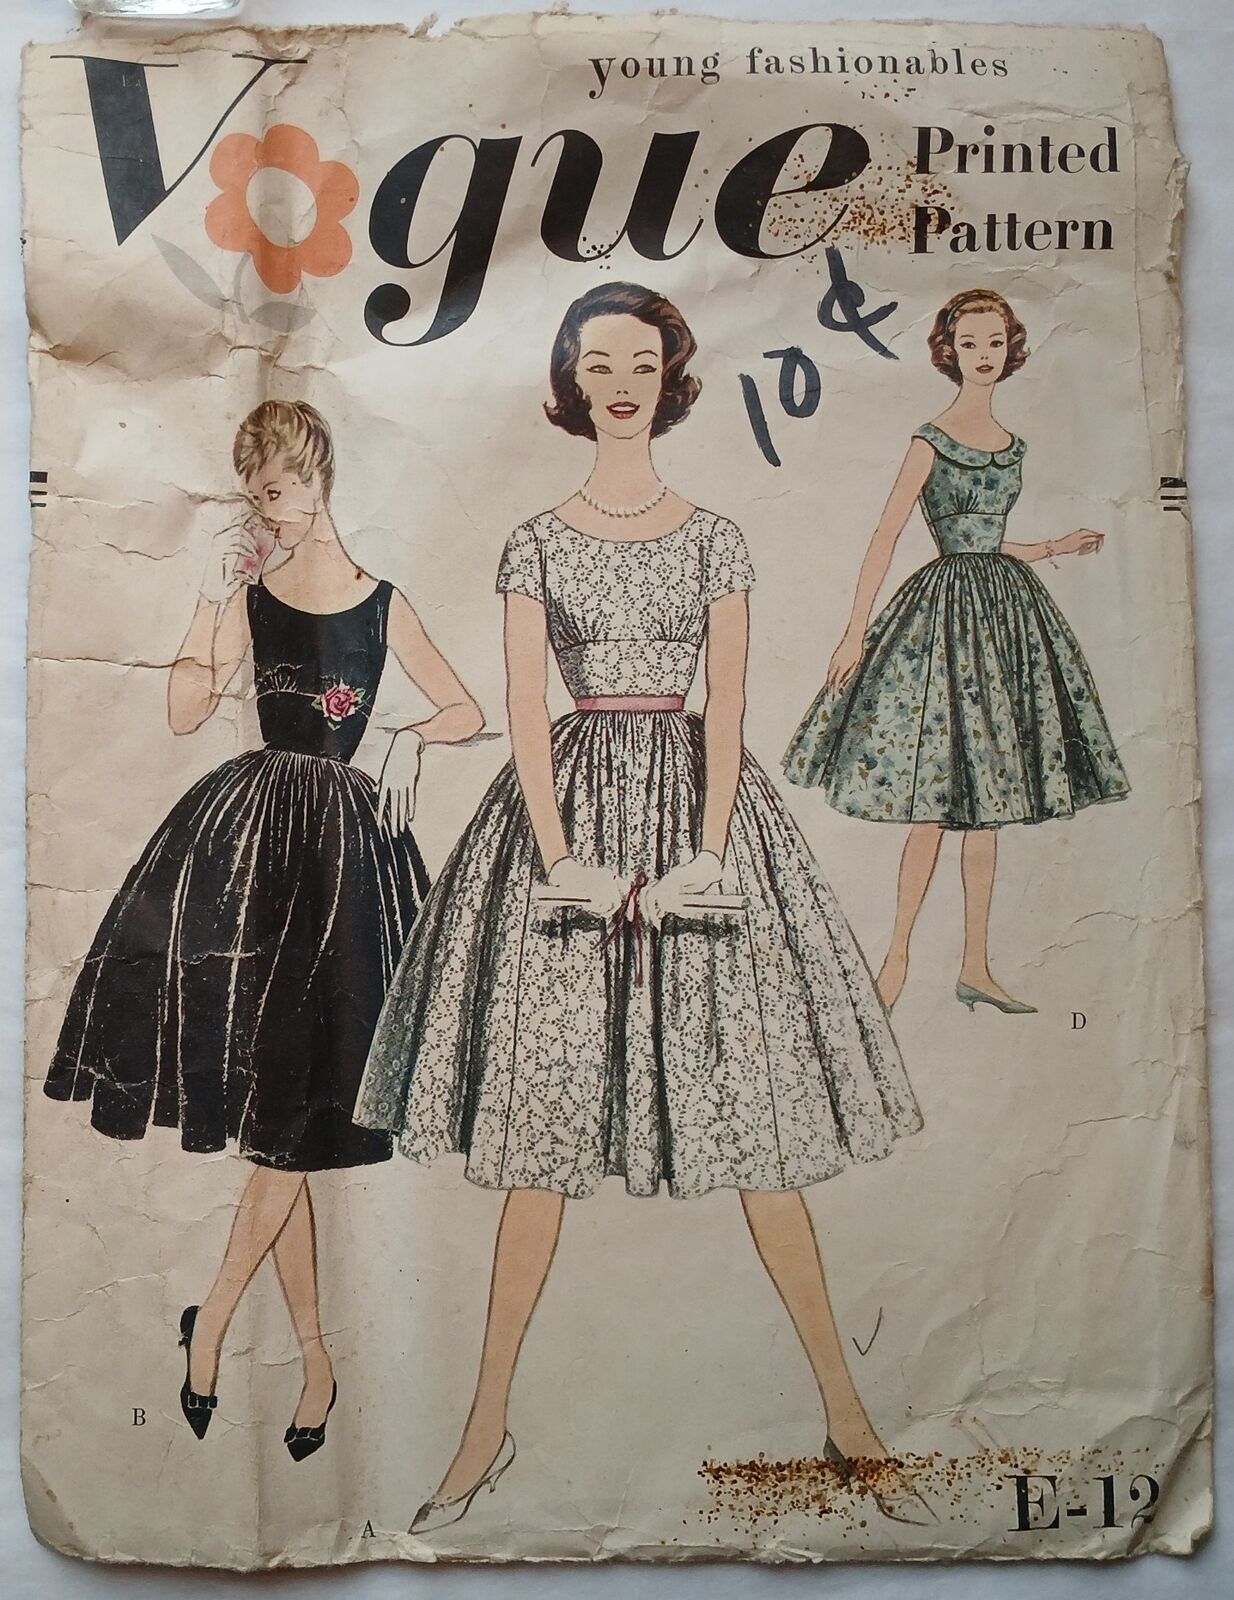 1958 Vogue Pattern E-12  Young Fashionables Printed Patterns, Skirts